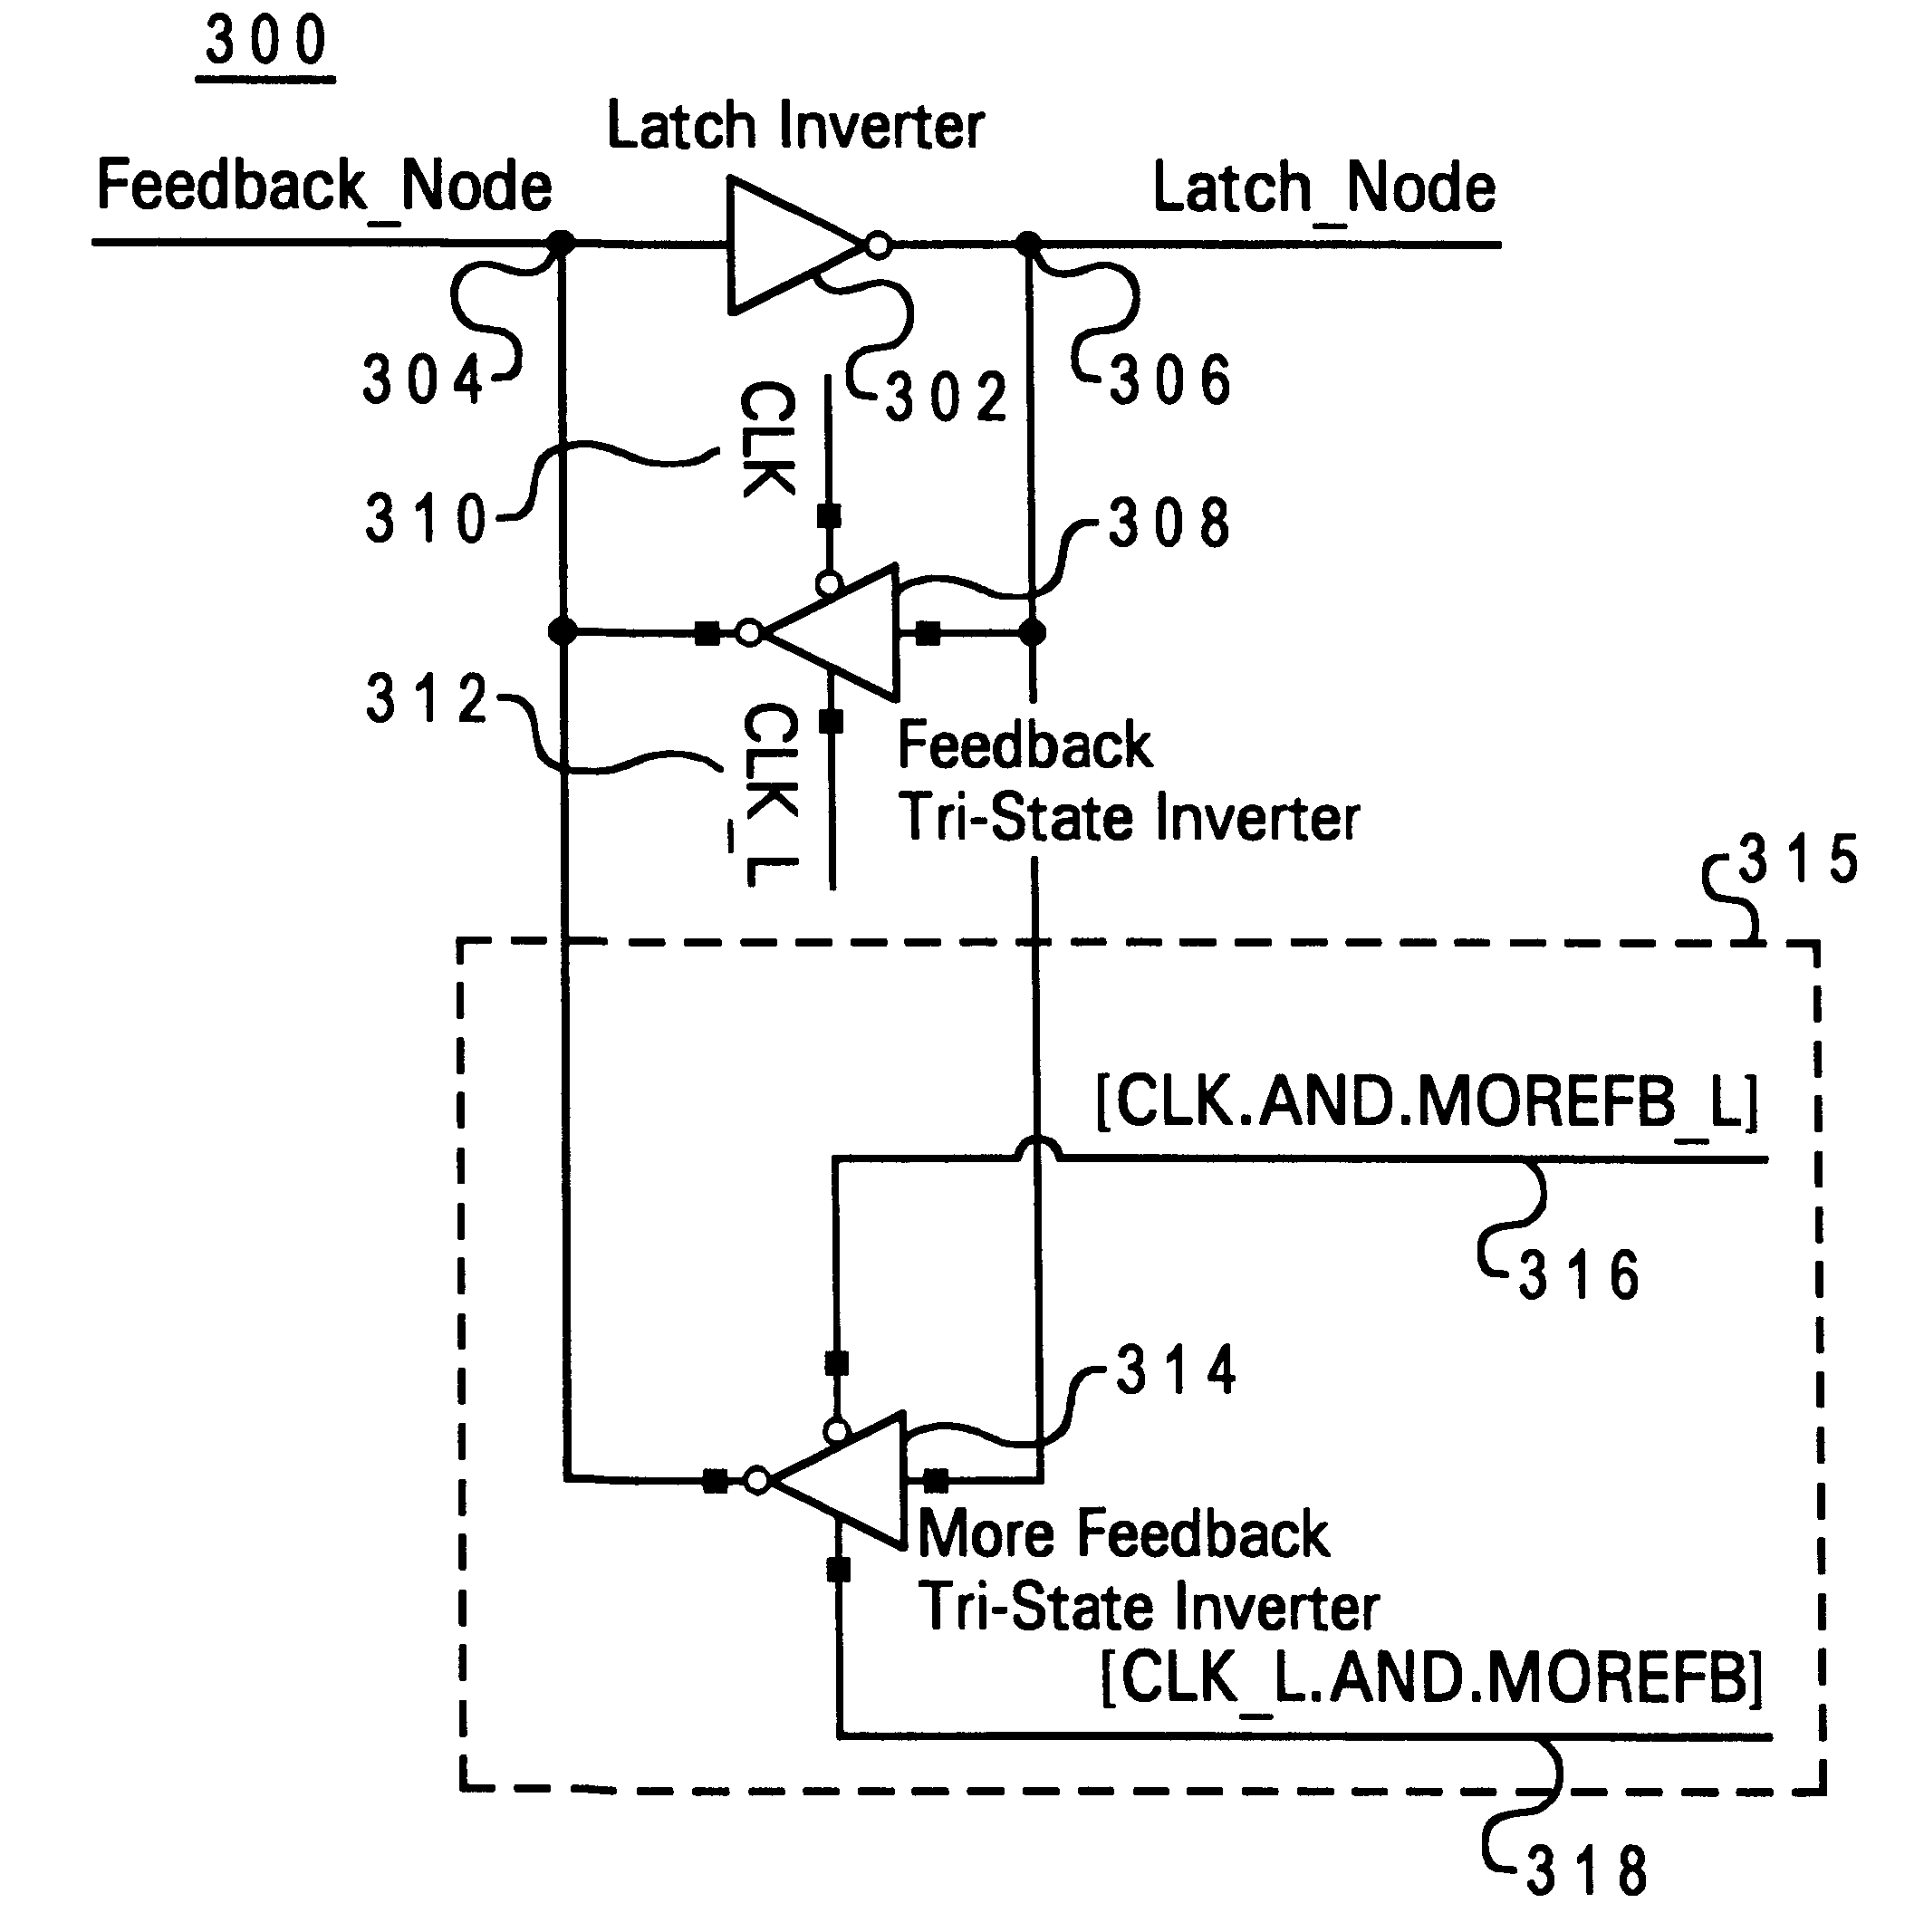 Adjustable feedback for CMOS latches